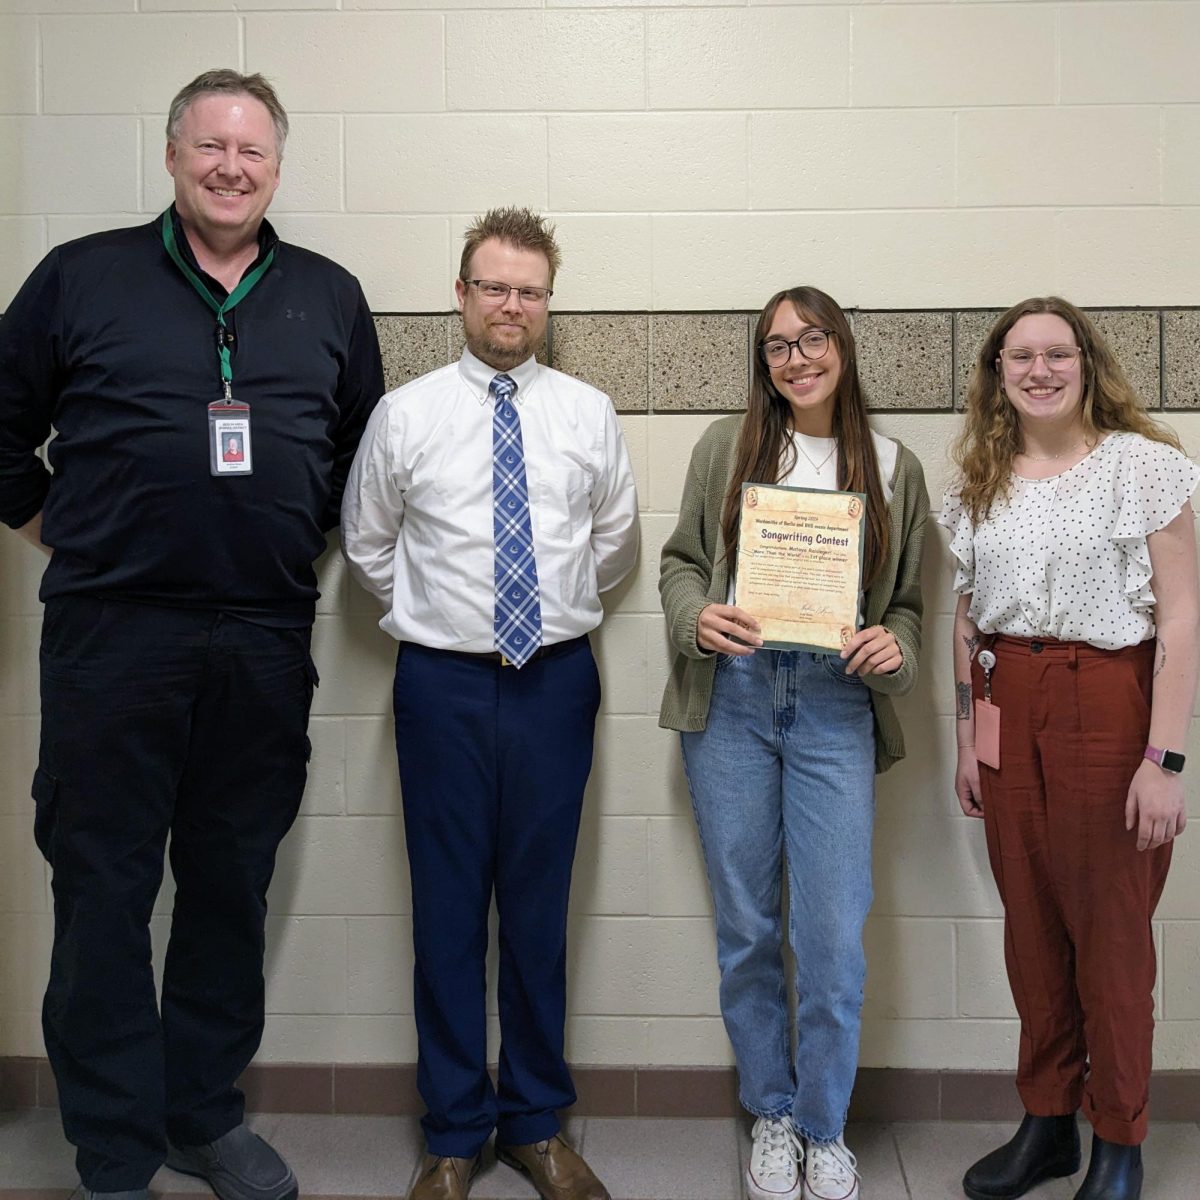 Left to right: Wordsmiths adviser Andy Reise, Band Director Ben Ruetten, senior Mataya Raisleger, Choir Director Abbe Lane. Raisleger won the song writing contest, hosted by the wordsmith of Berlin. Her song More Than the World won a $40 prize.